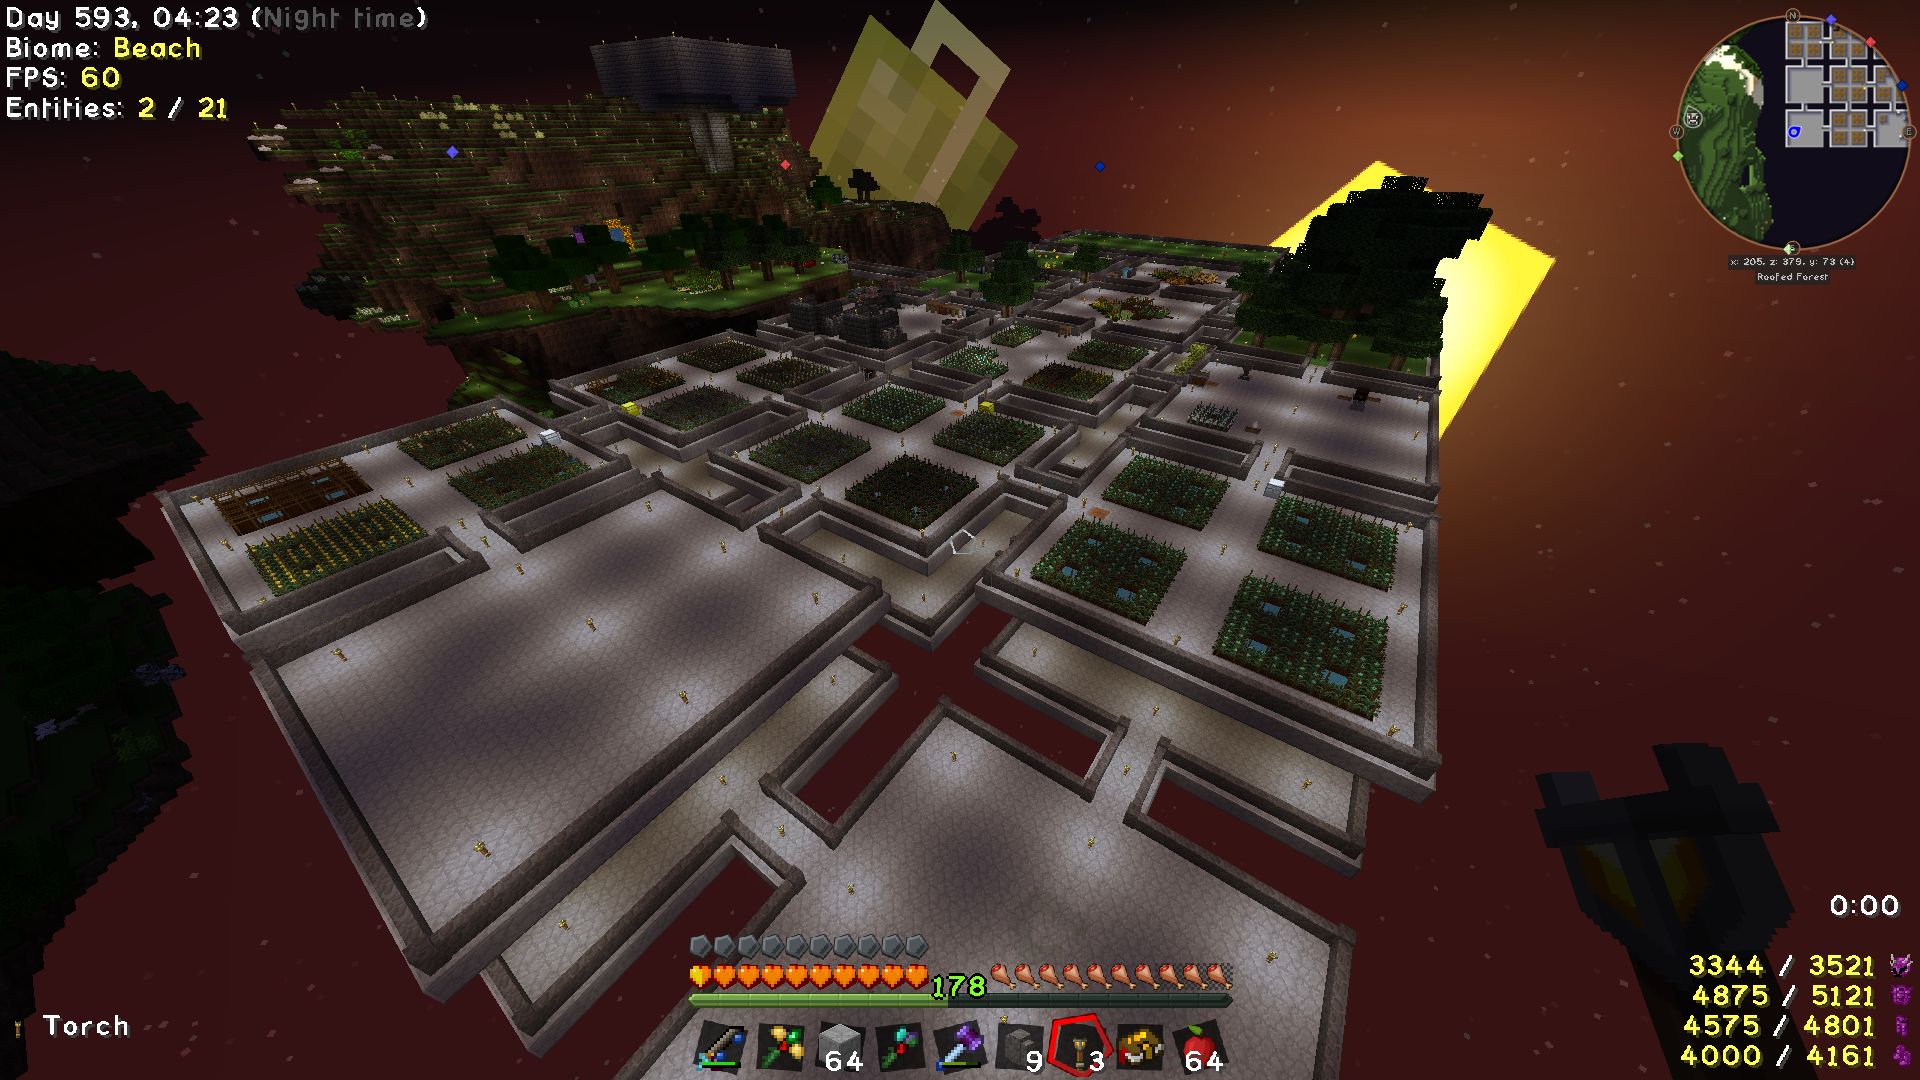 Another view of the skyblock